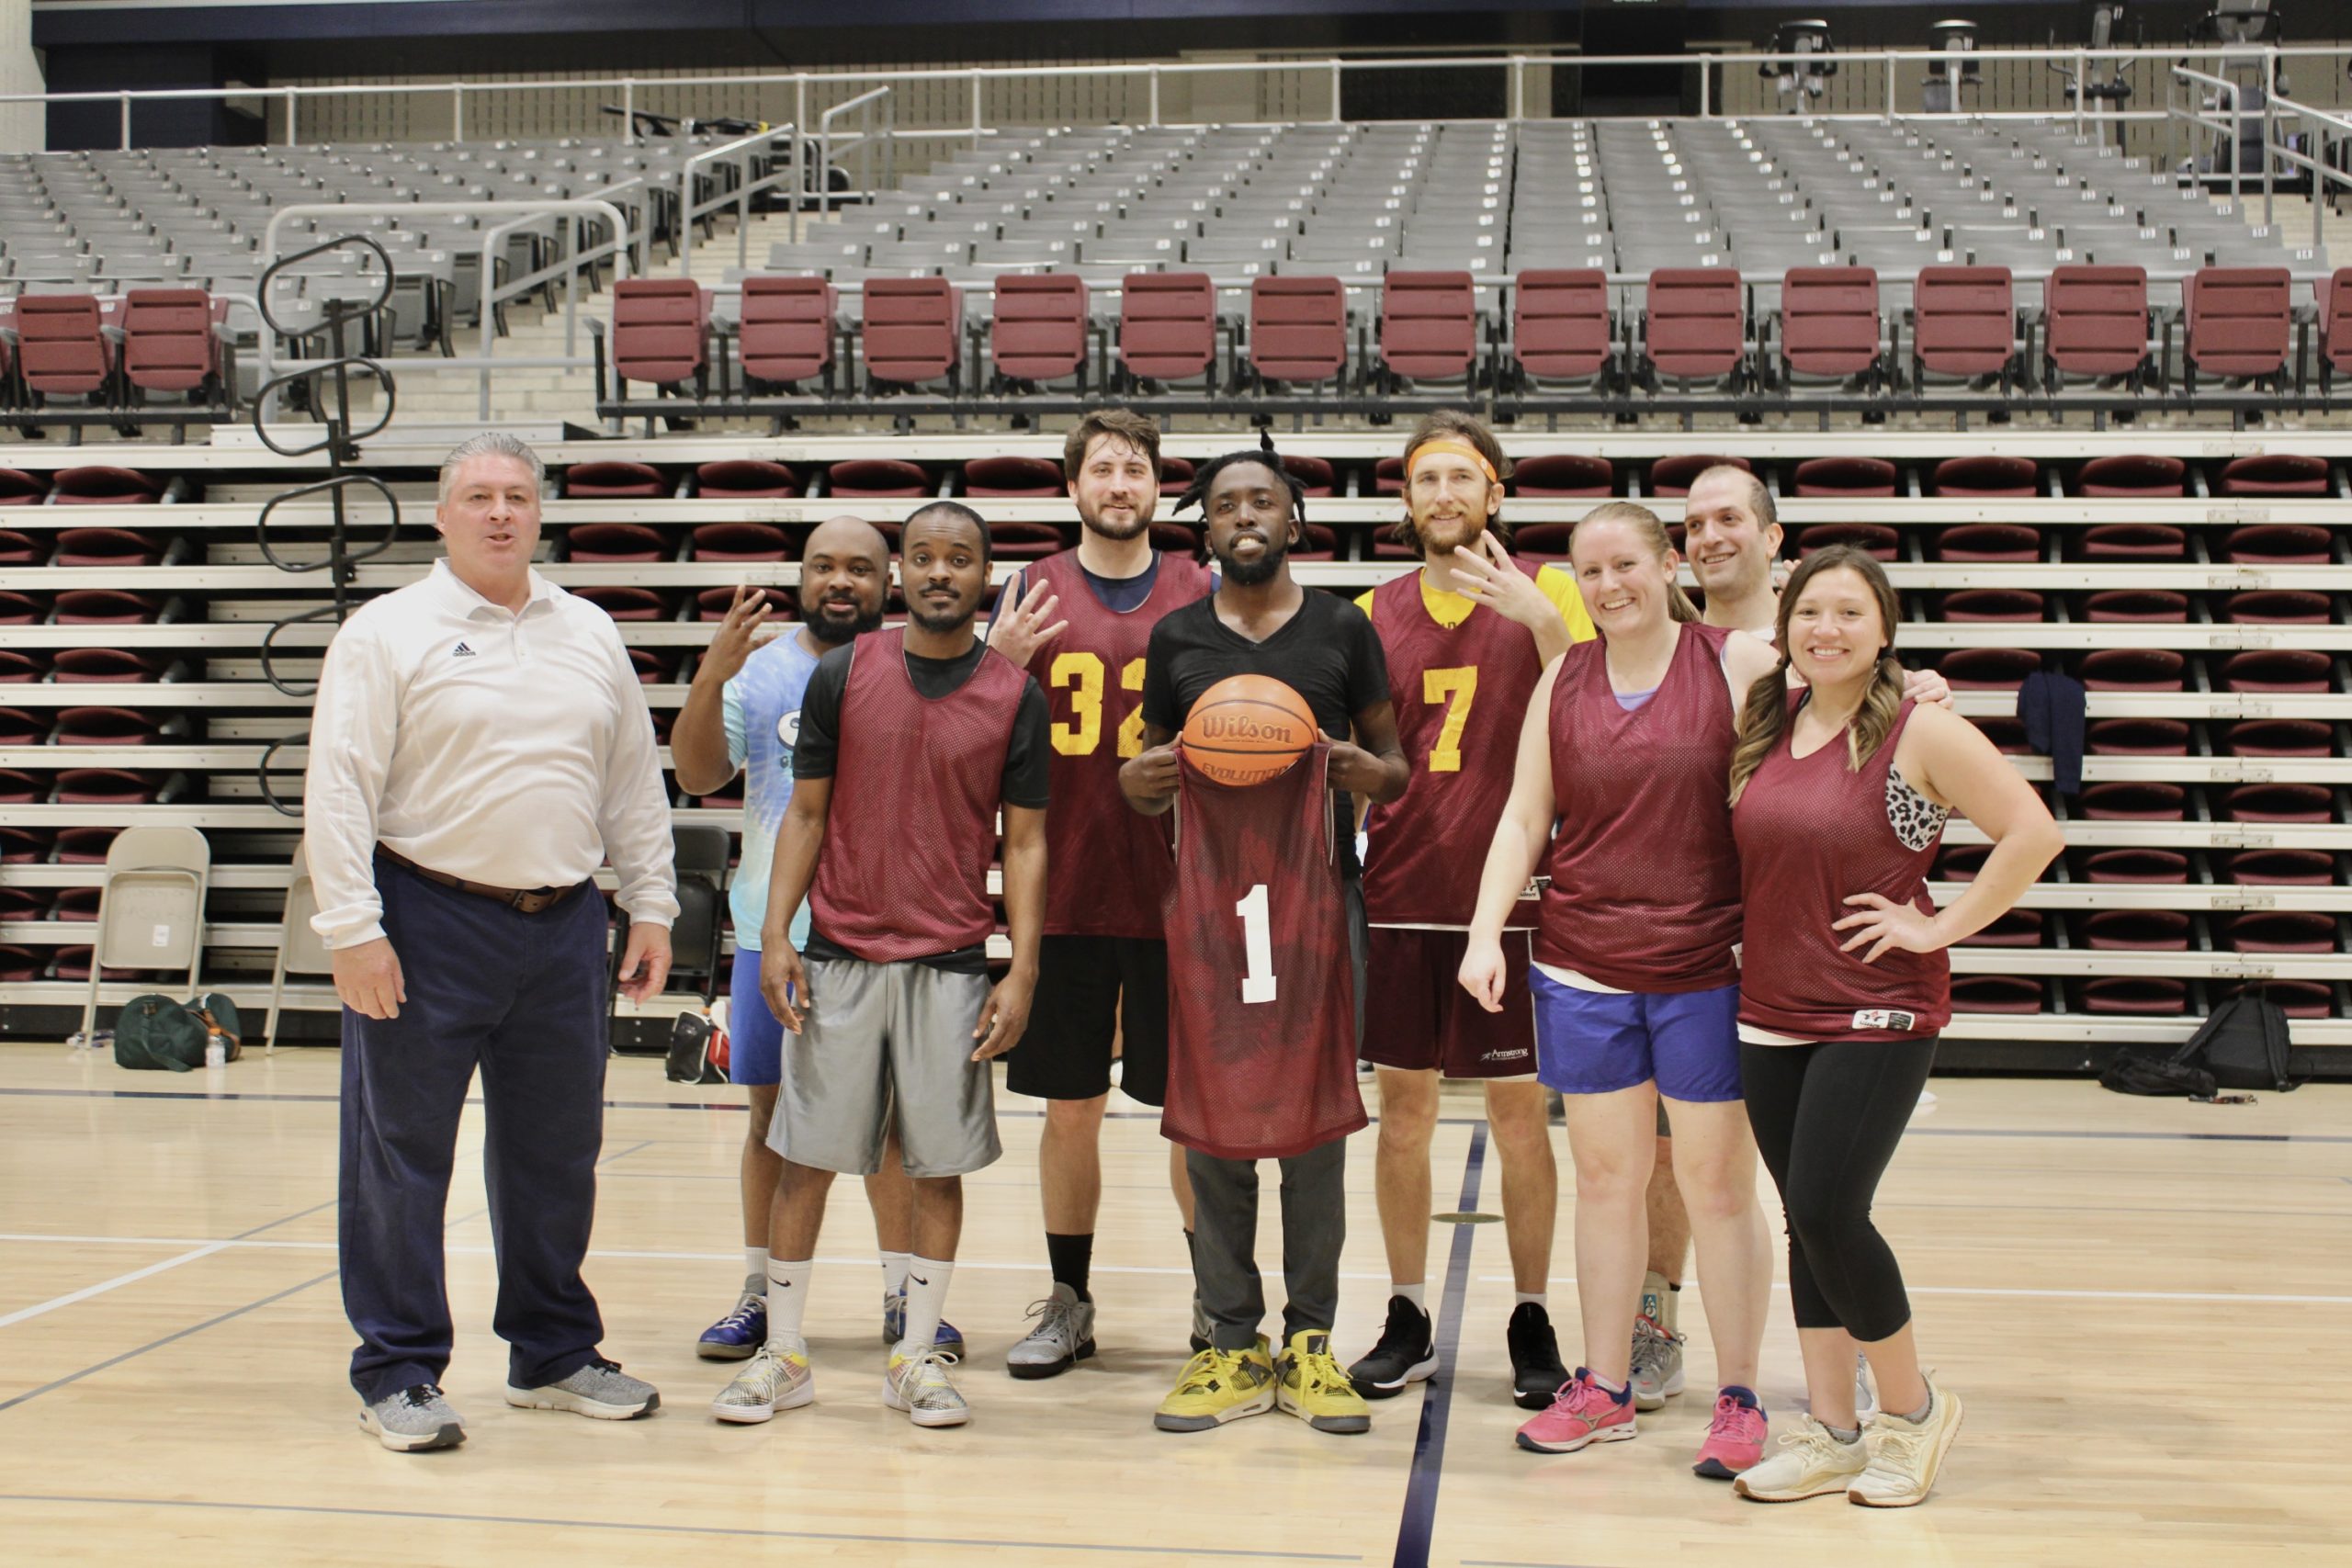 Faculty+vs+Student+basketball+game